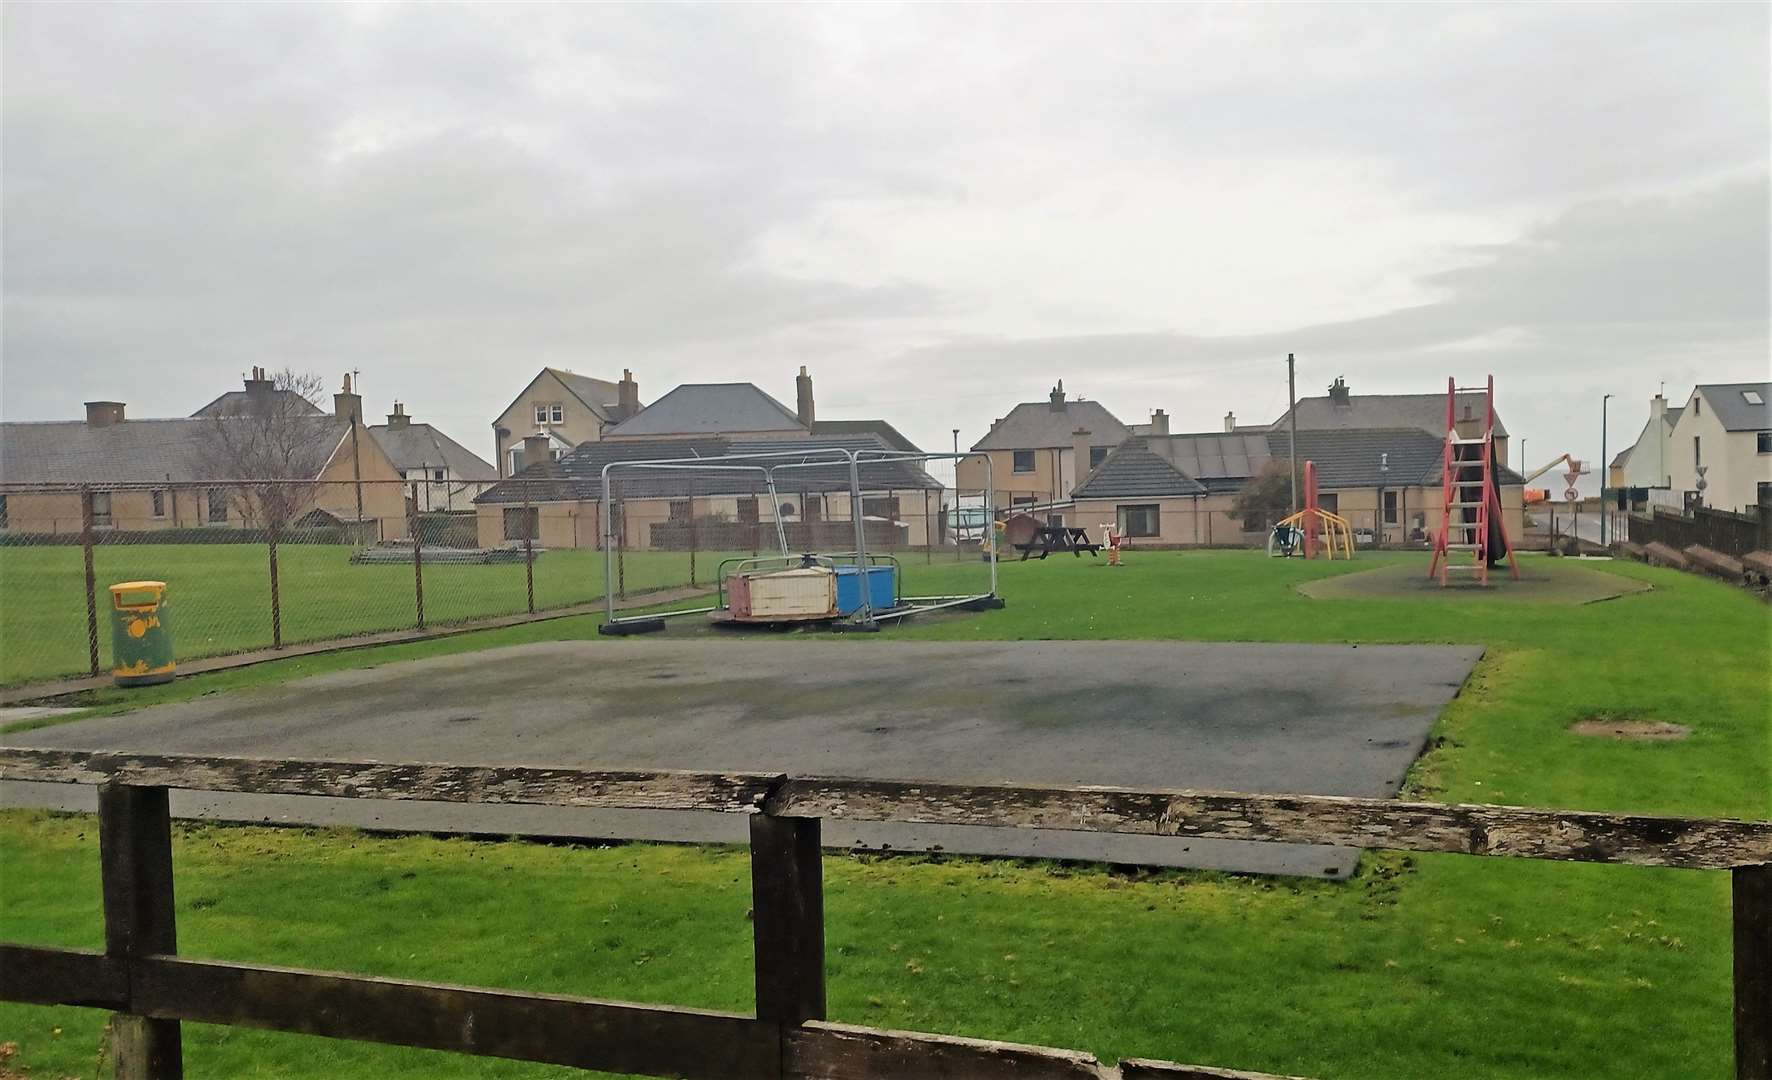 New units are planned for the Beach Road play area as well, said Mr Glasgow. He thinks the roundabout is beyond repair and may date back 70 years. Picture: A Glasgow